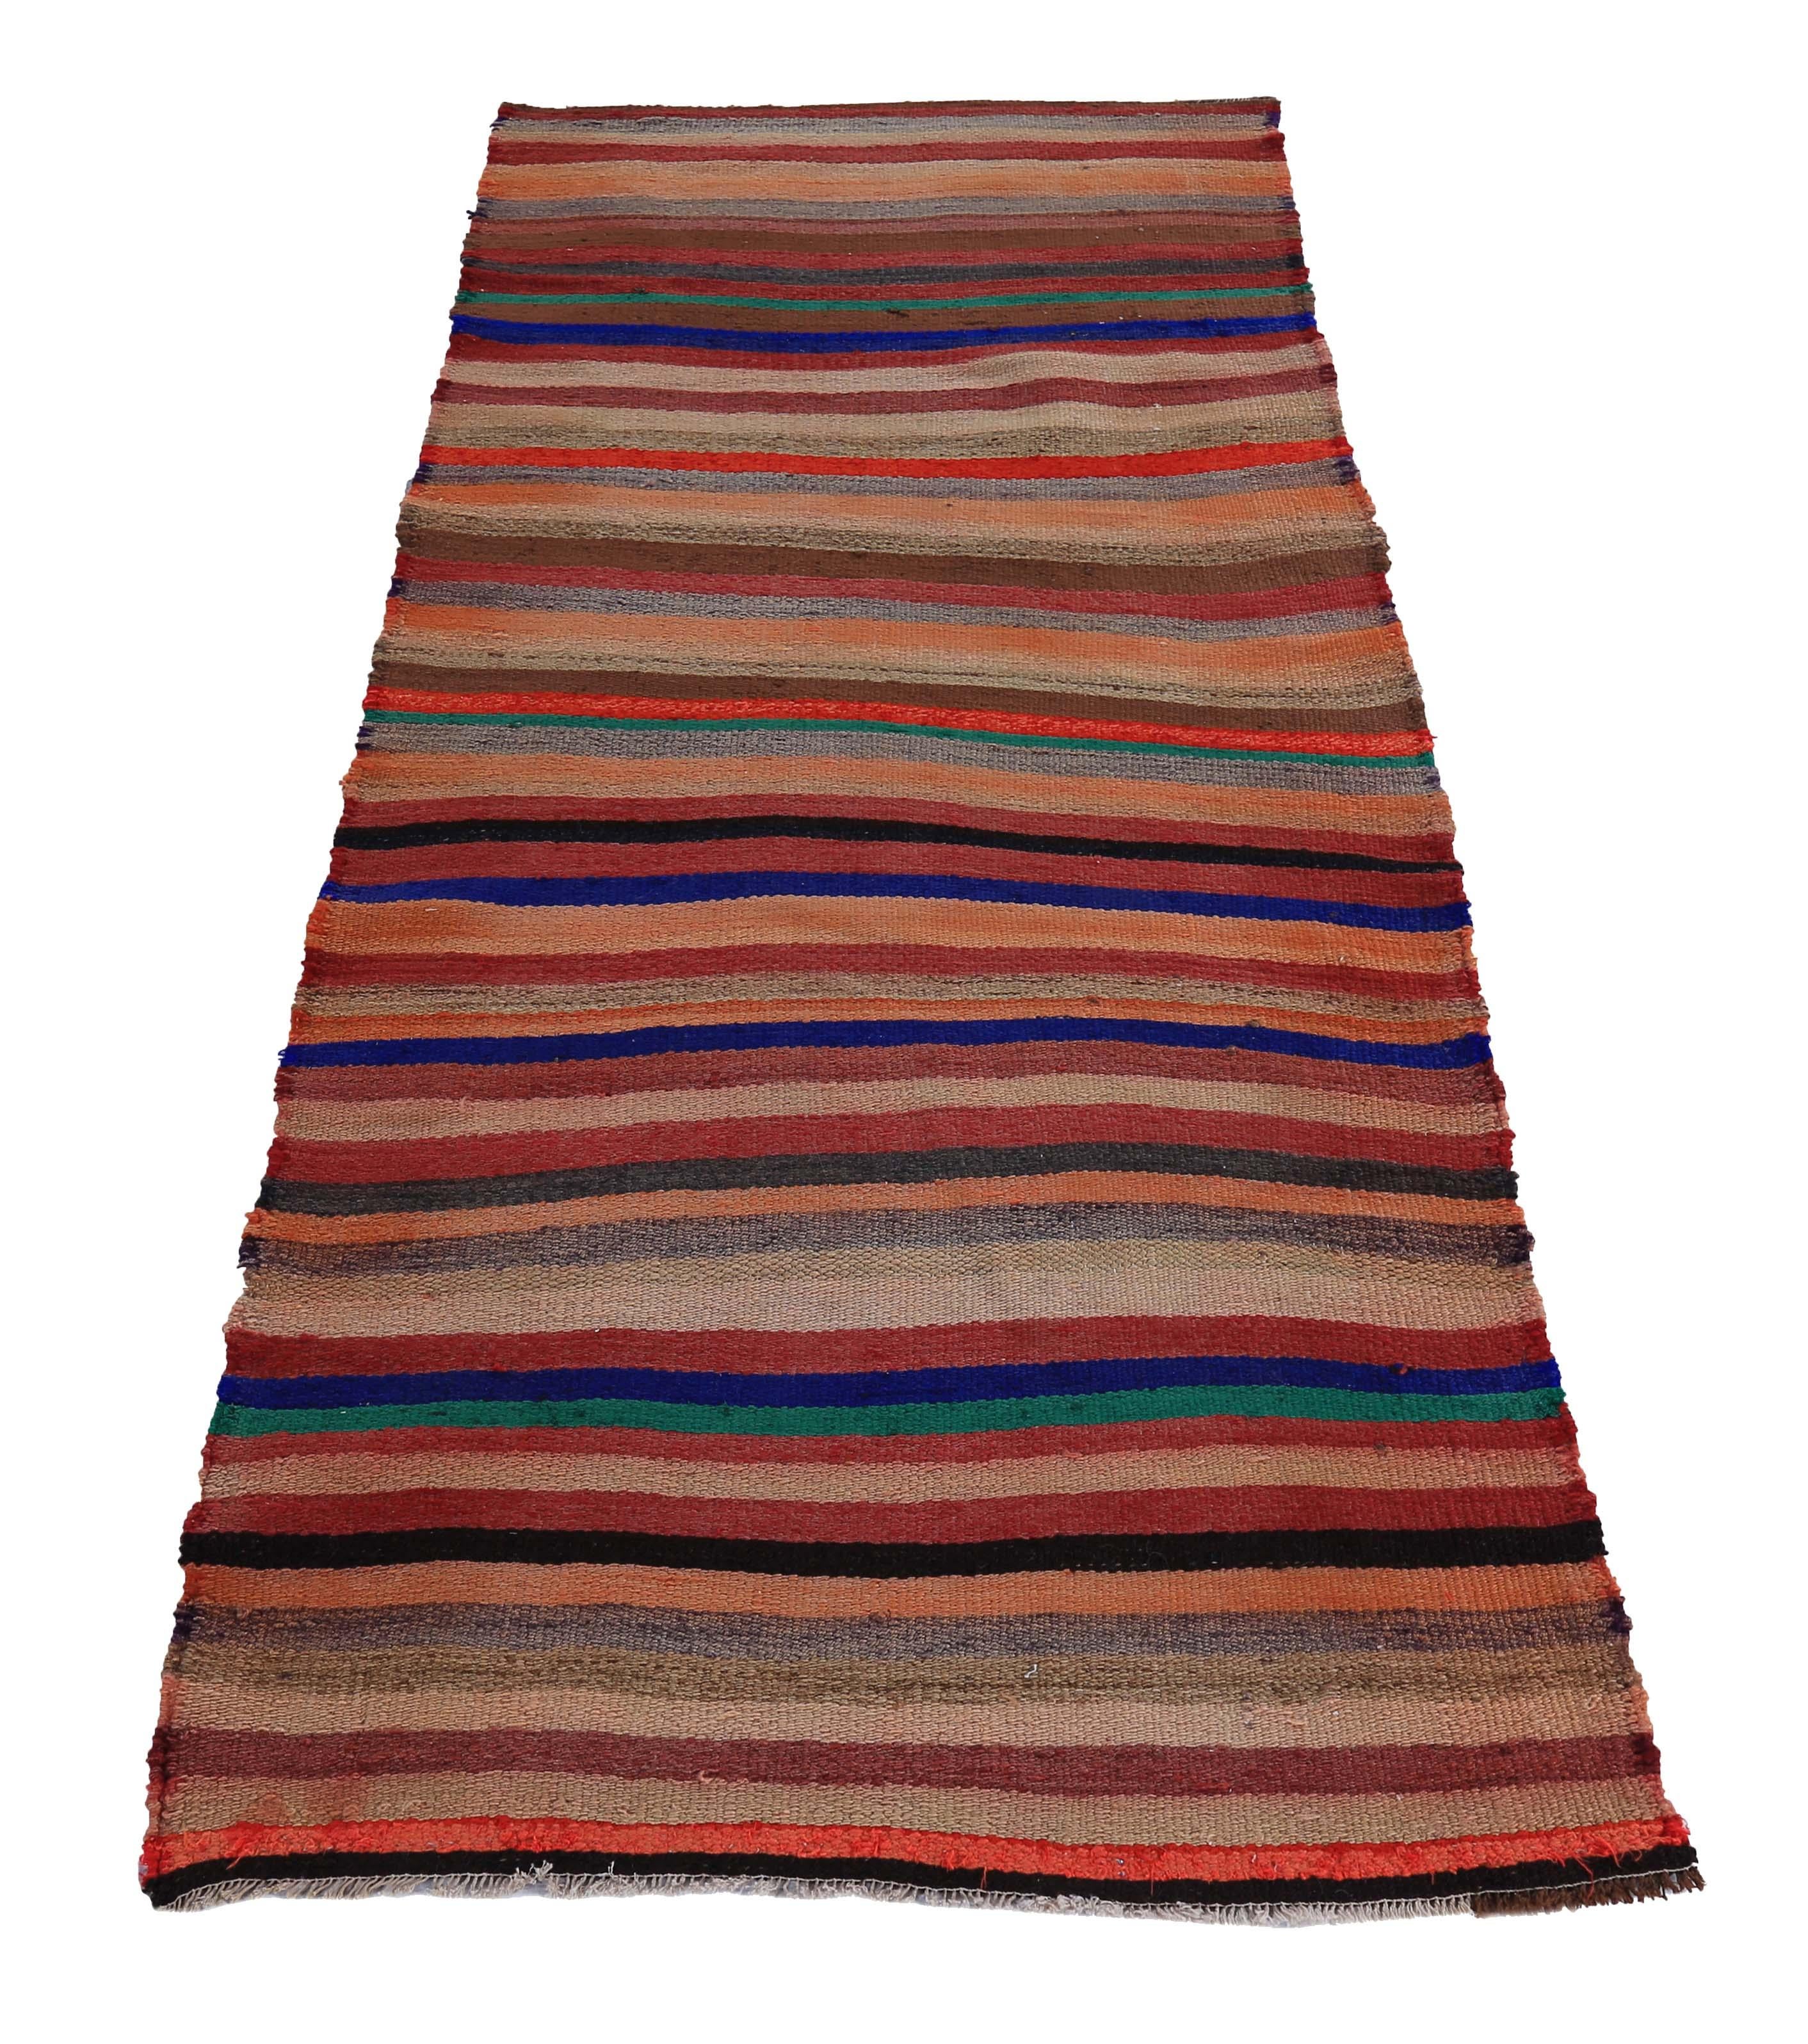 Modern Turkish rug handwoven from the finest sheep’s wool and colored with all-natural vegetable dyes that are safe for humans and pets. It’s a traditional Kilim flat-weave design in orange, red and blue stripes. It’s a stunning piece to get for